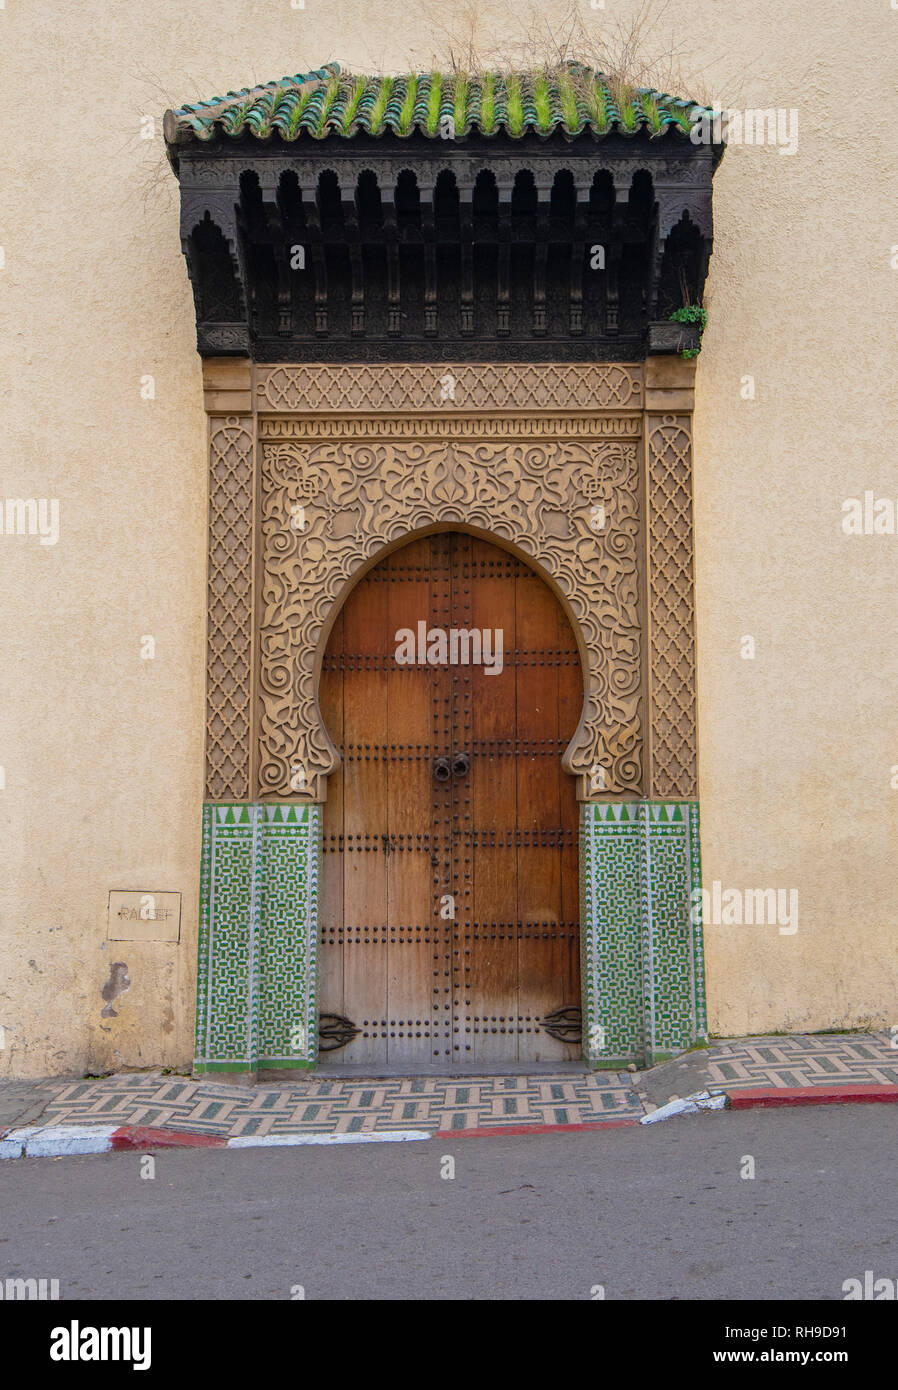 Fes, Morocco. Traditional Moroccan style design of wooden entry door. mosque Bab Bou Jeloud Mosque gate Stock Photo